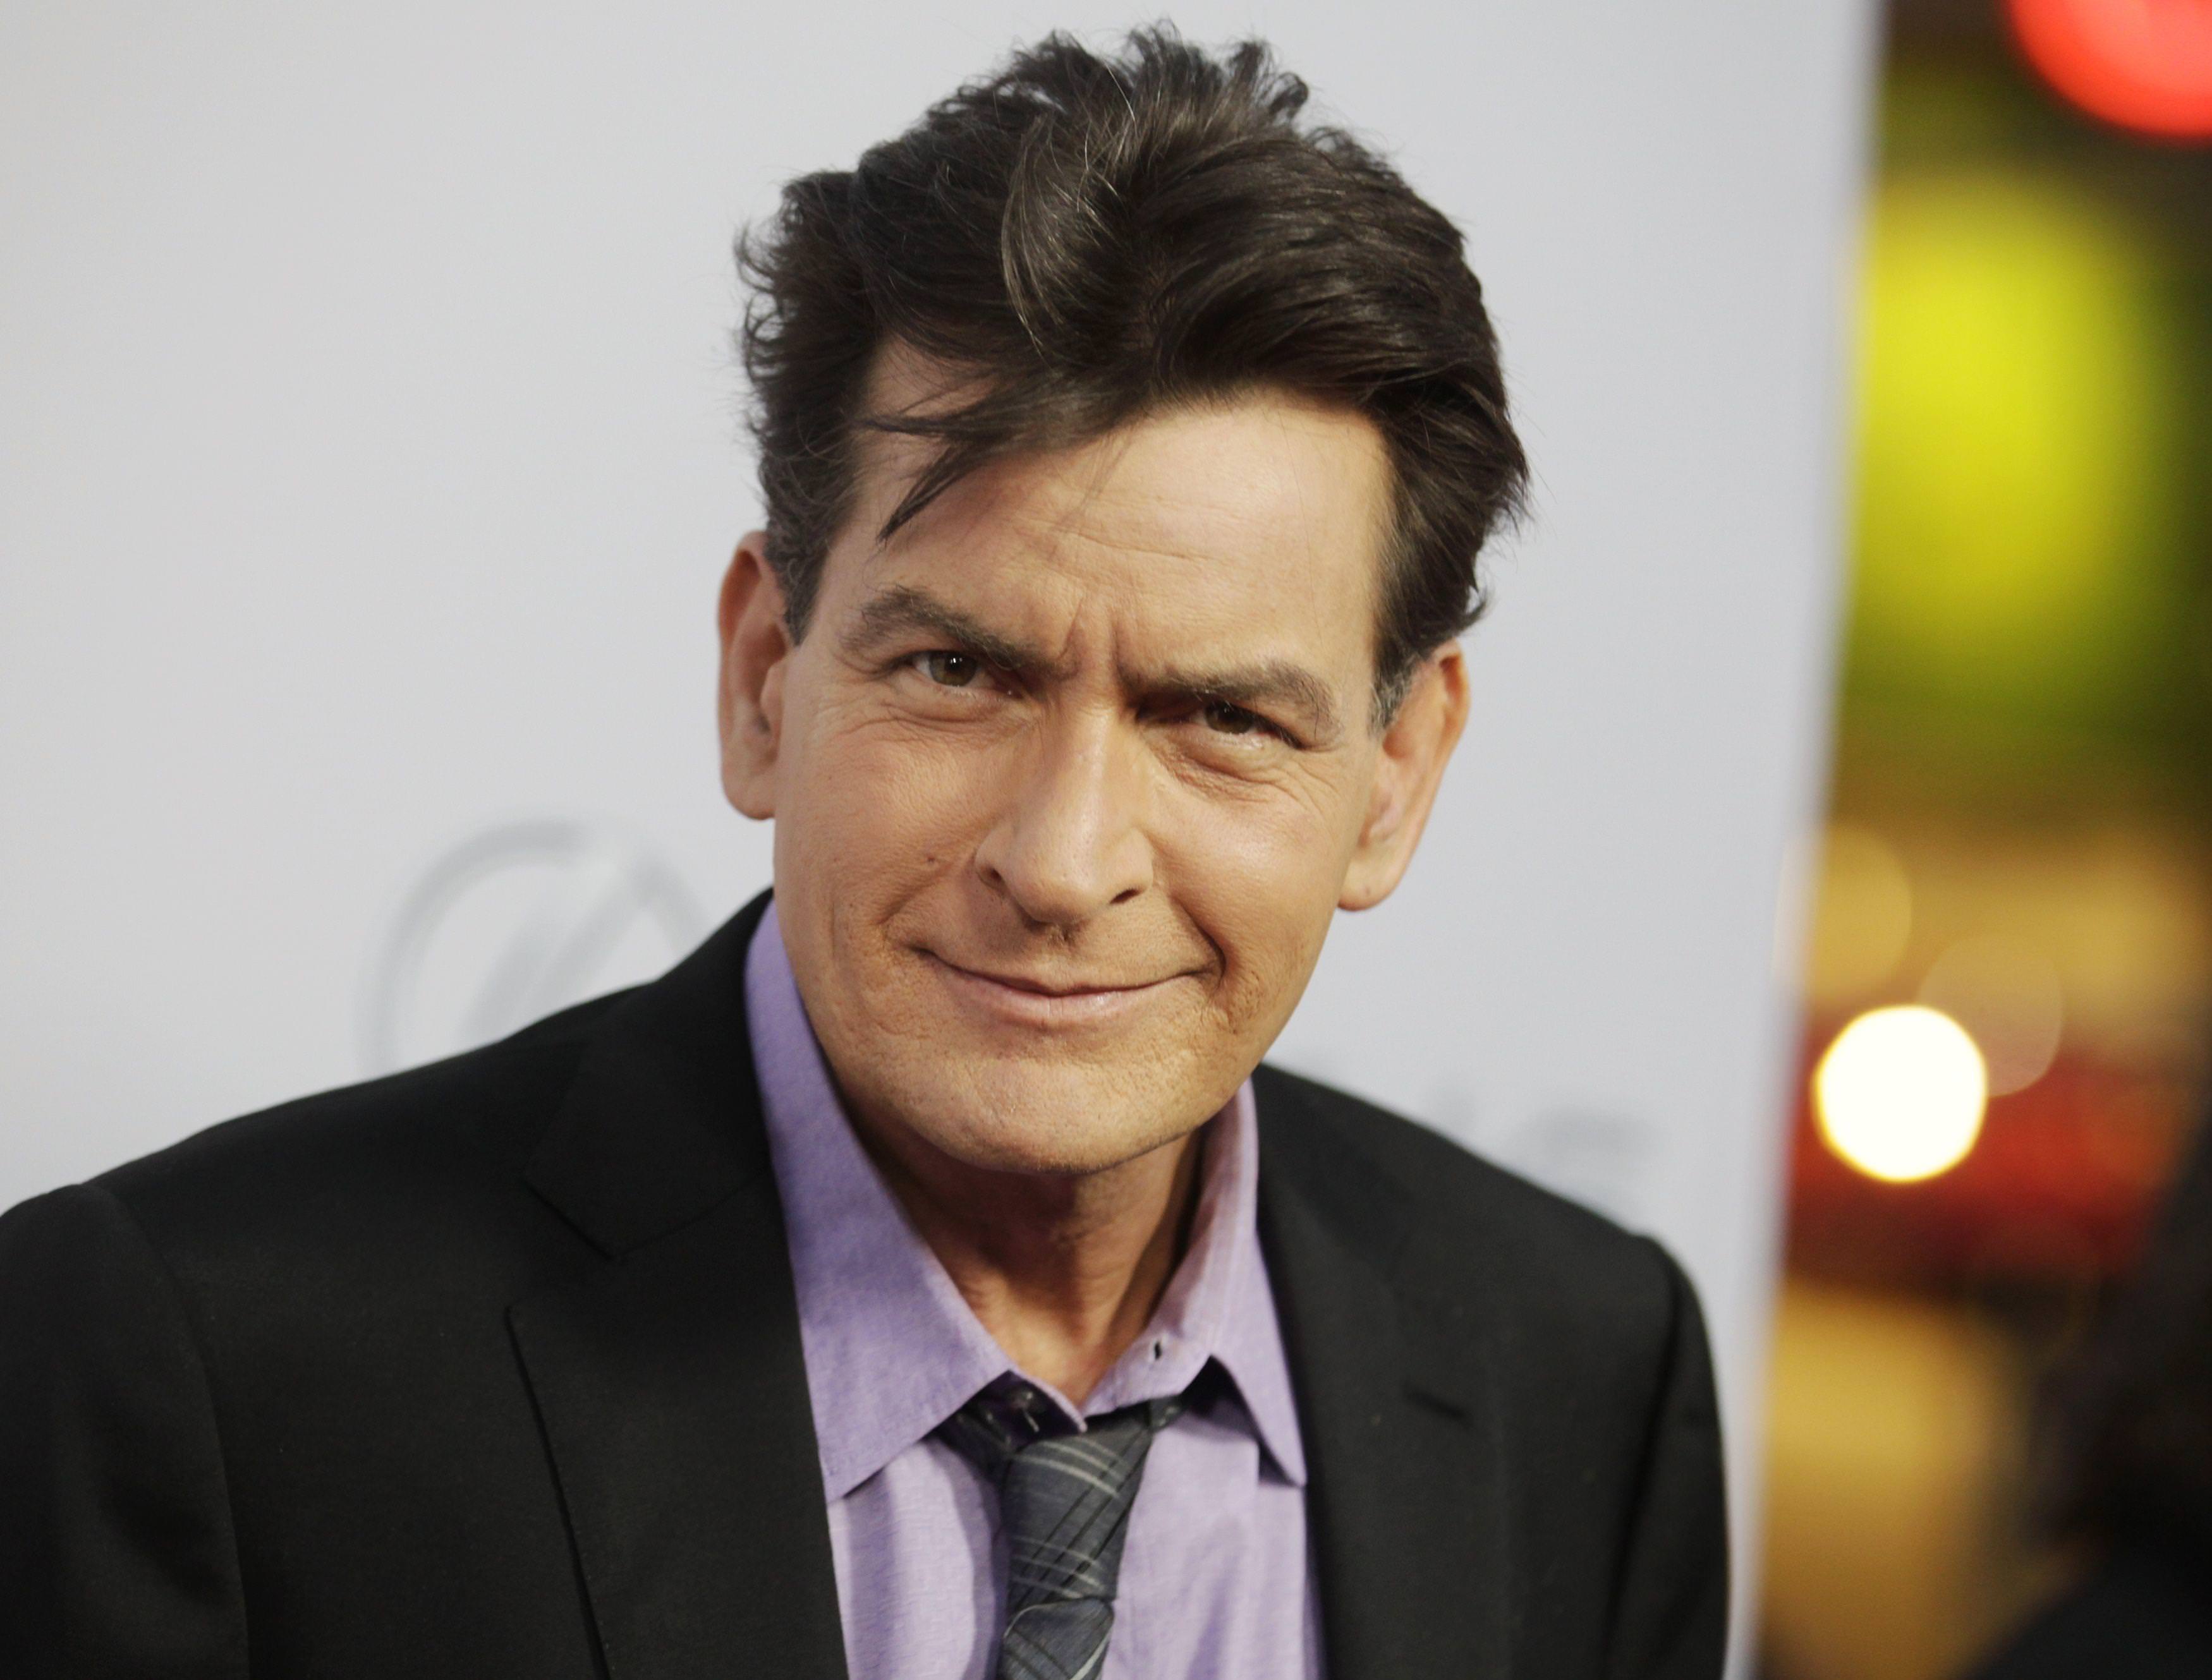 Charlie Sheen Evicted From Bar – No Not For A Good Reason